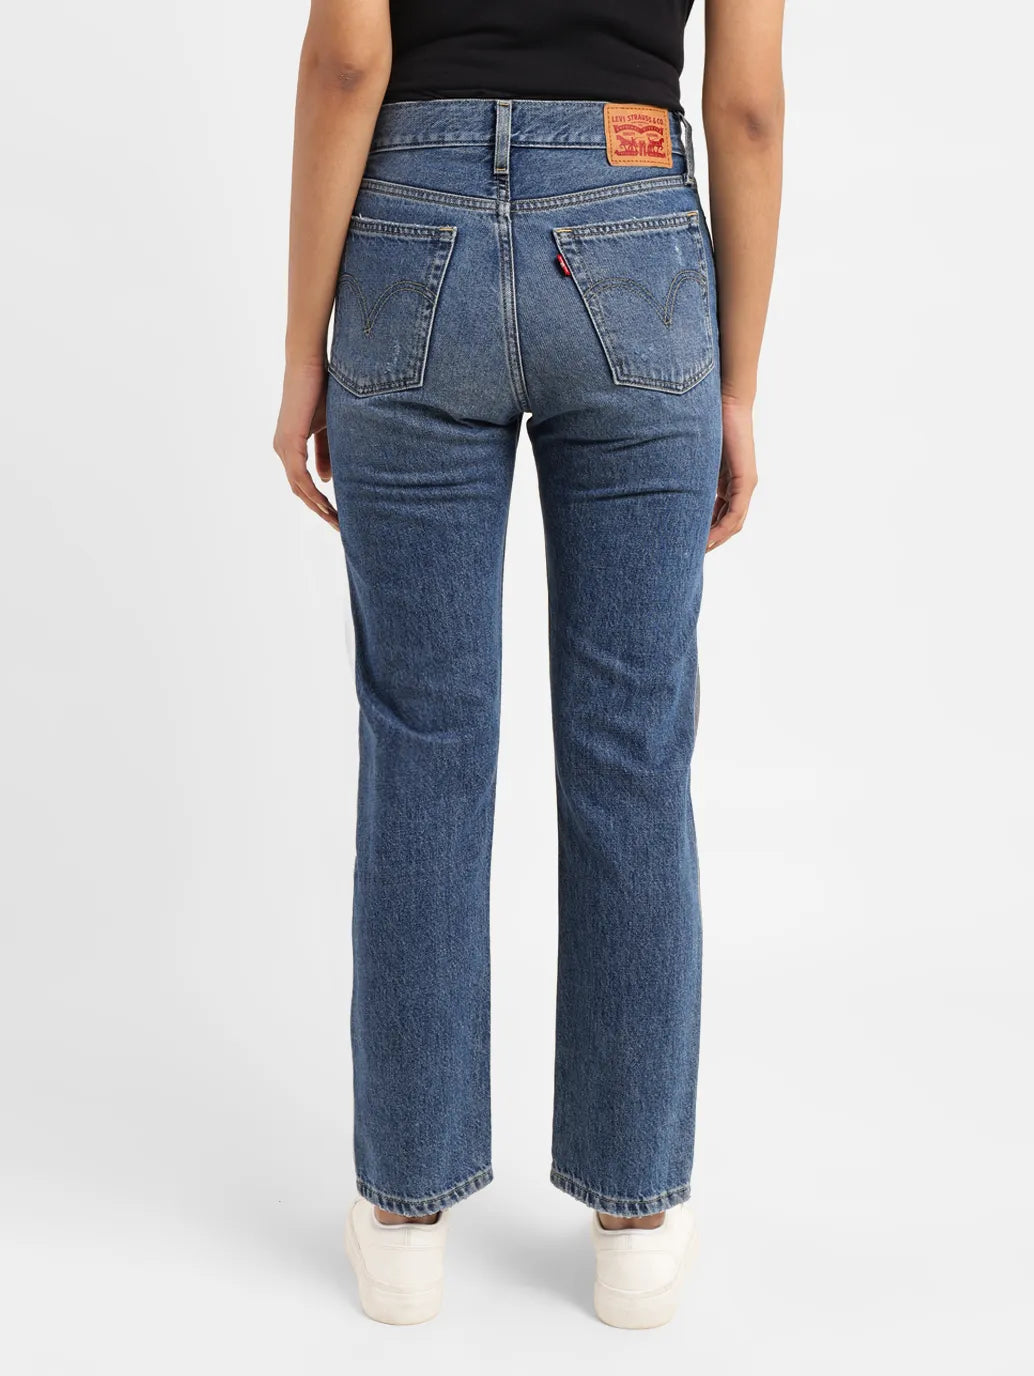 Women's High Rise Wedgie Straight Fit Jeans